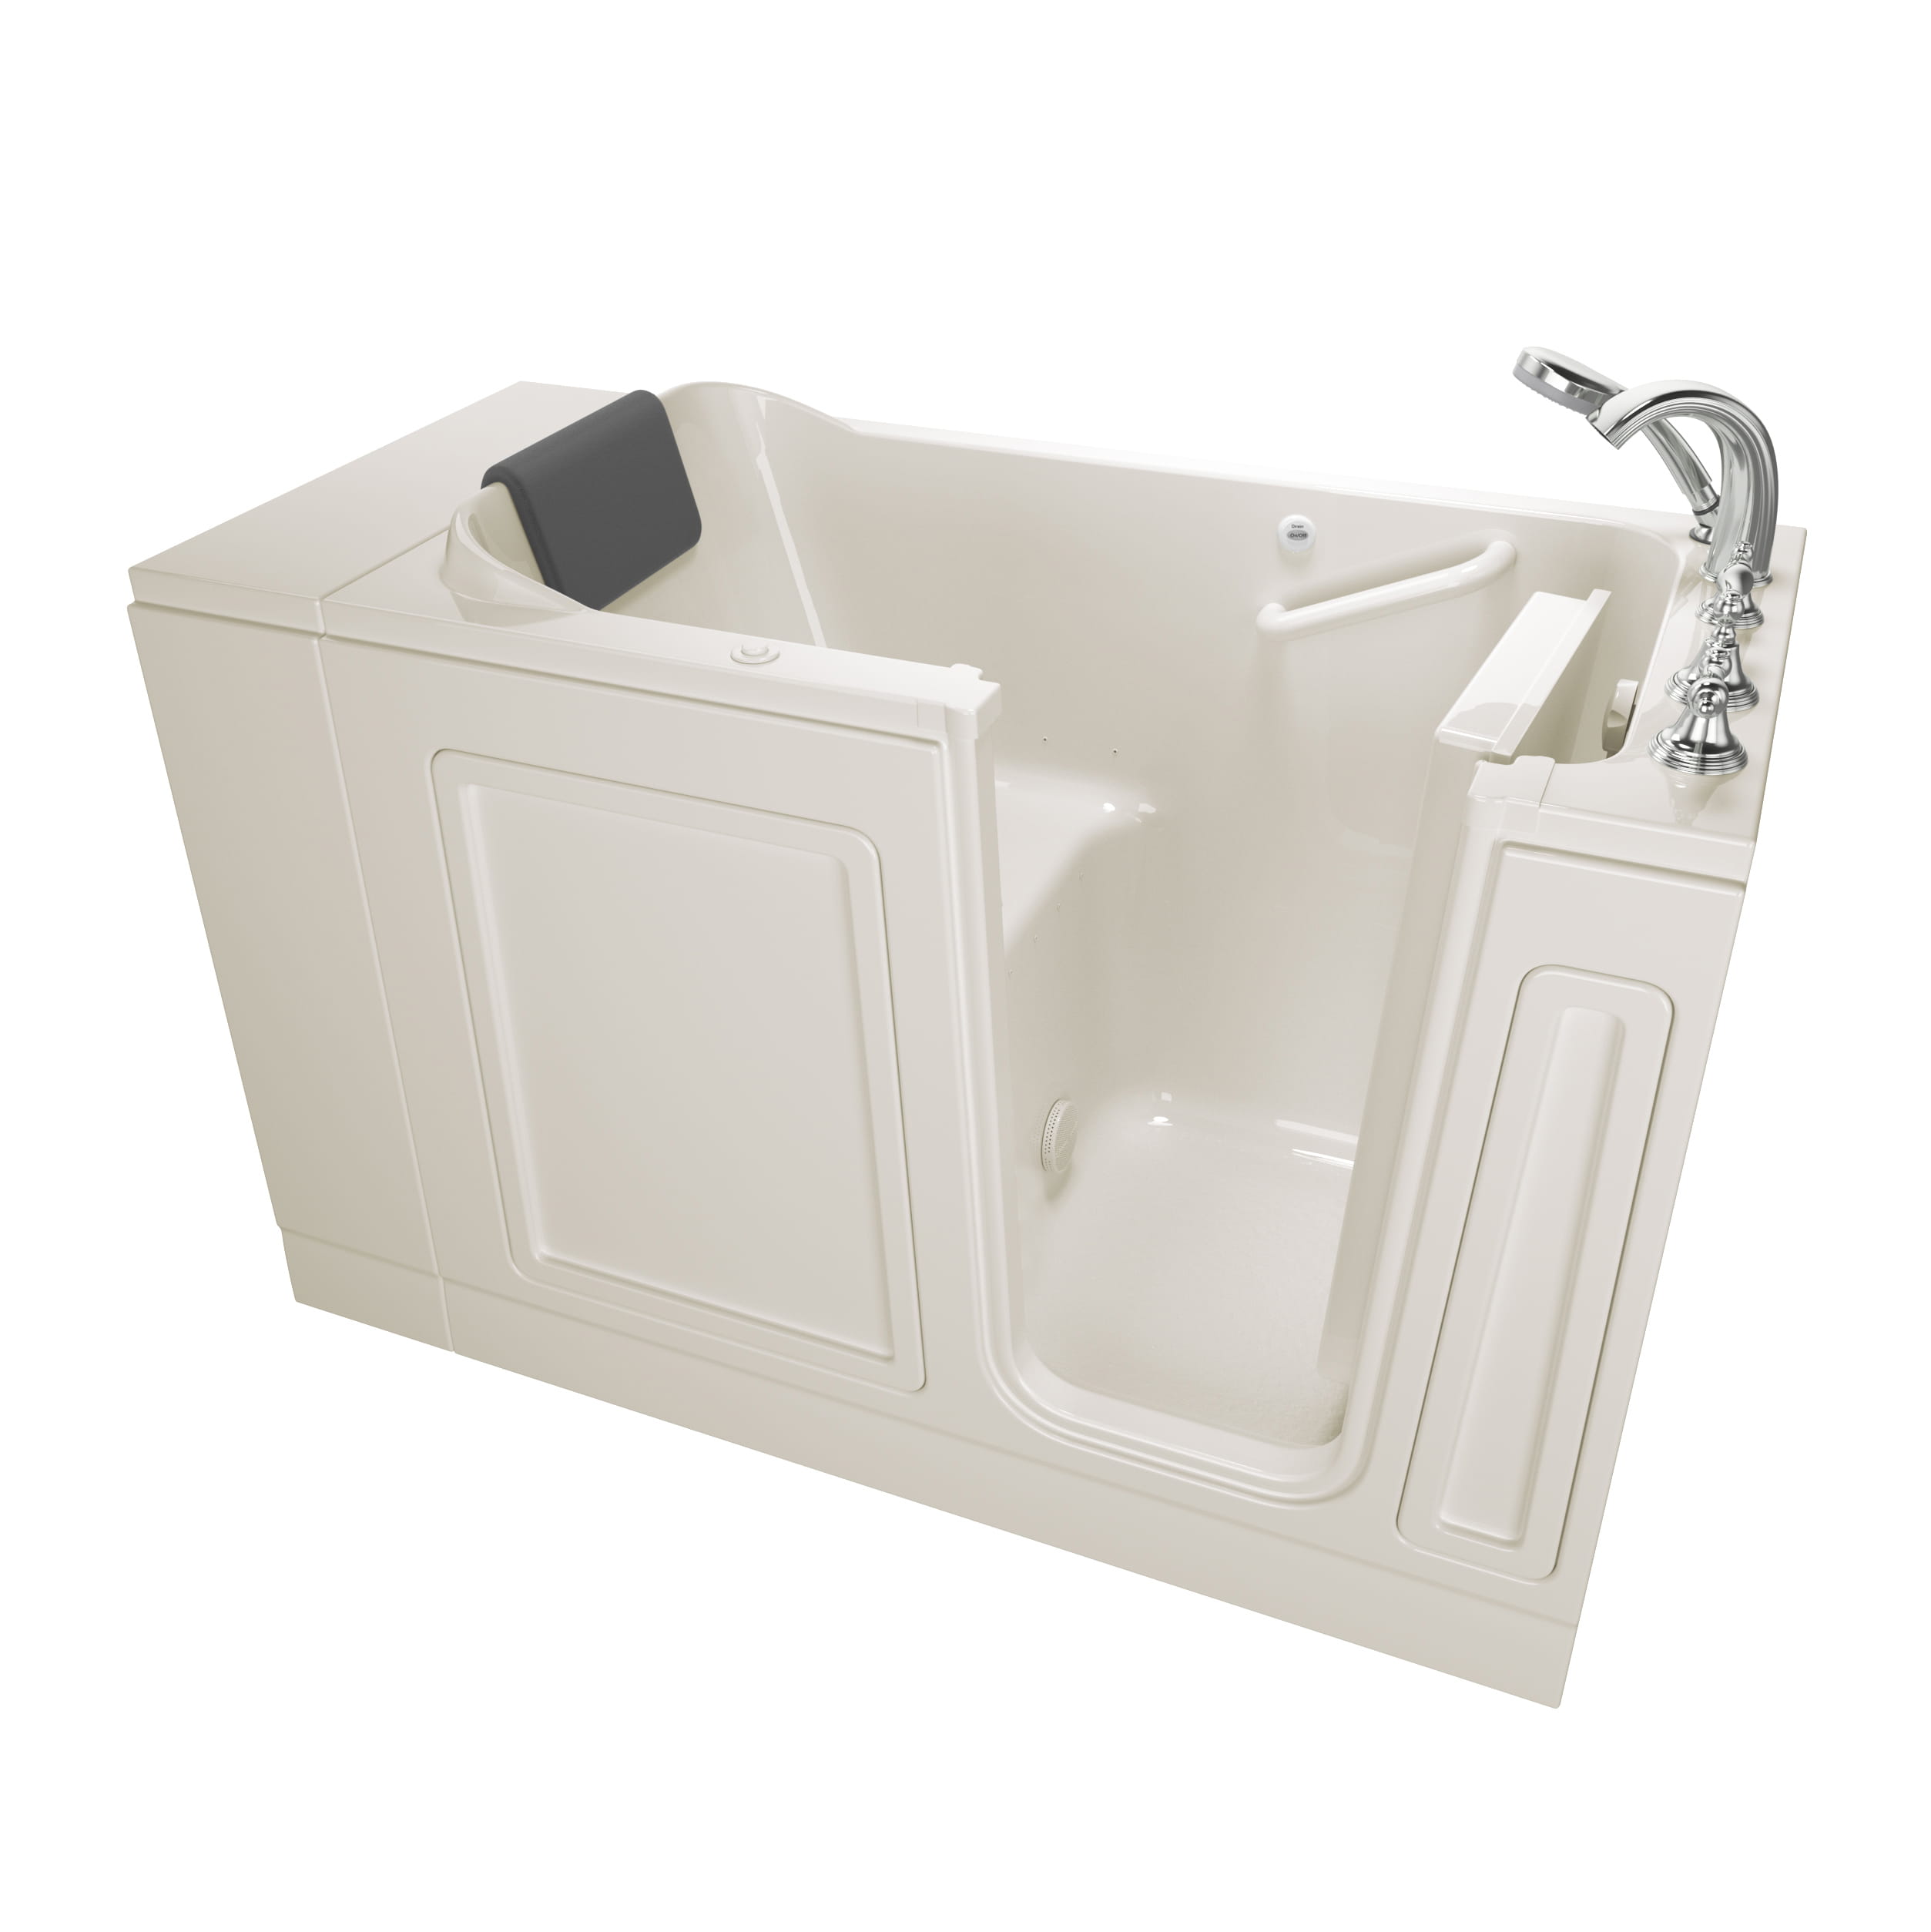 Acrylic Luxury Series 28 x 48 Inch Walk in Tub With Air Spa System   Right Hand Drain With Faucet WIB LINEN